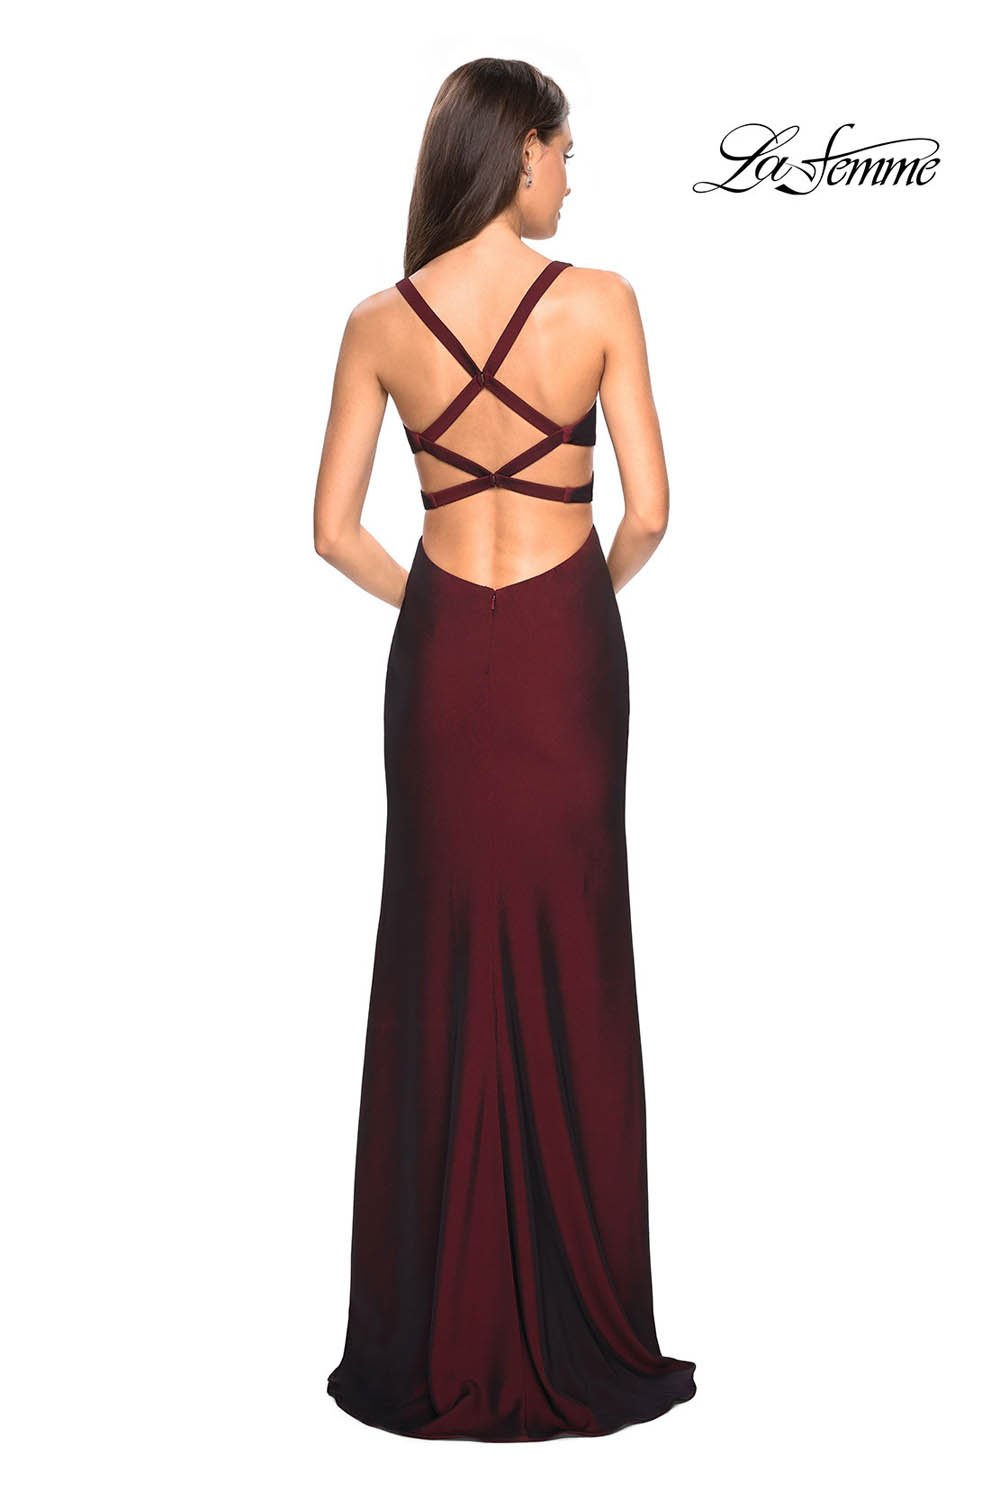 Behold My Love Burgundy Off-The-Shoulder Twist-Front Maxi Dress | Burgundy  maxi dress, Burgundy dress outfit, Burgundy wedding guest dress